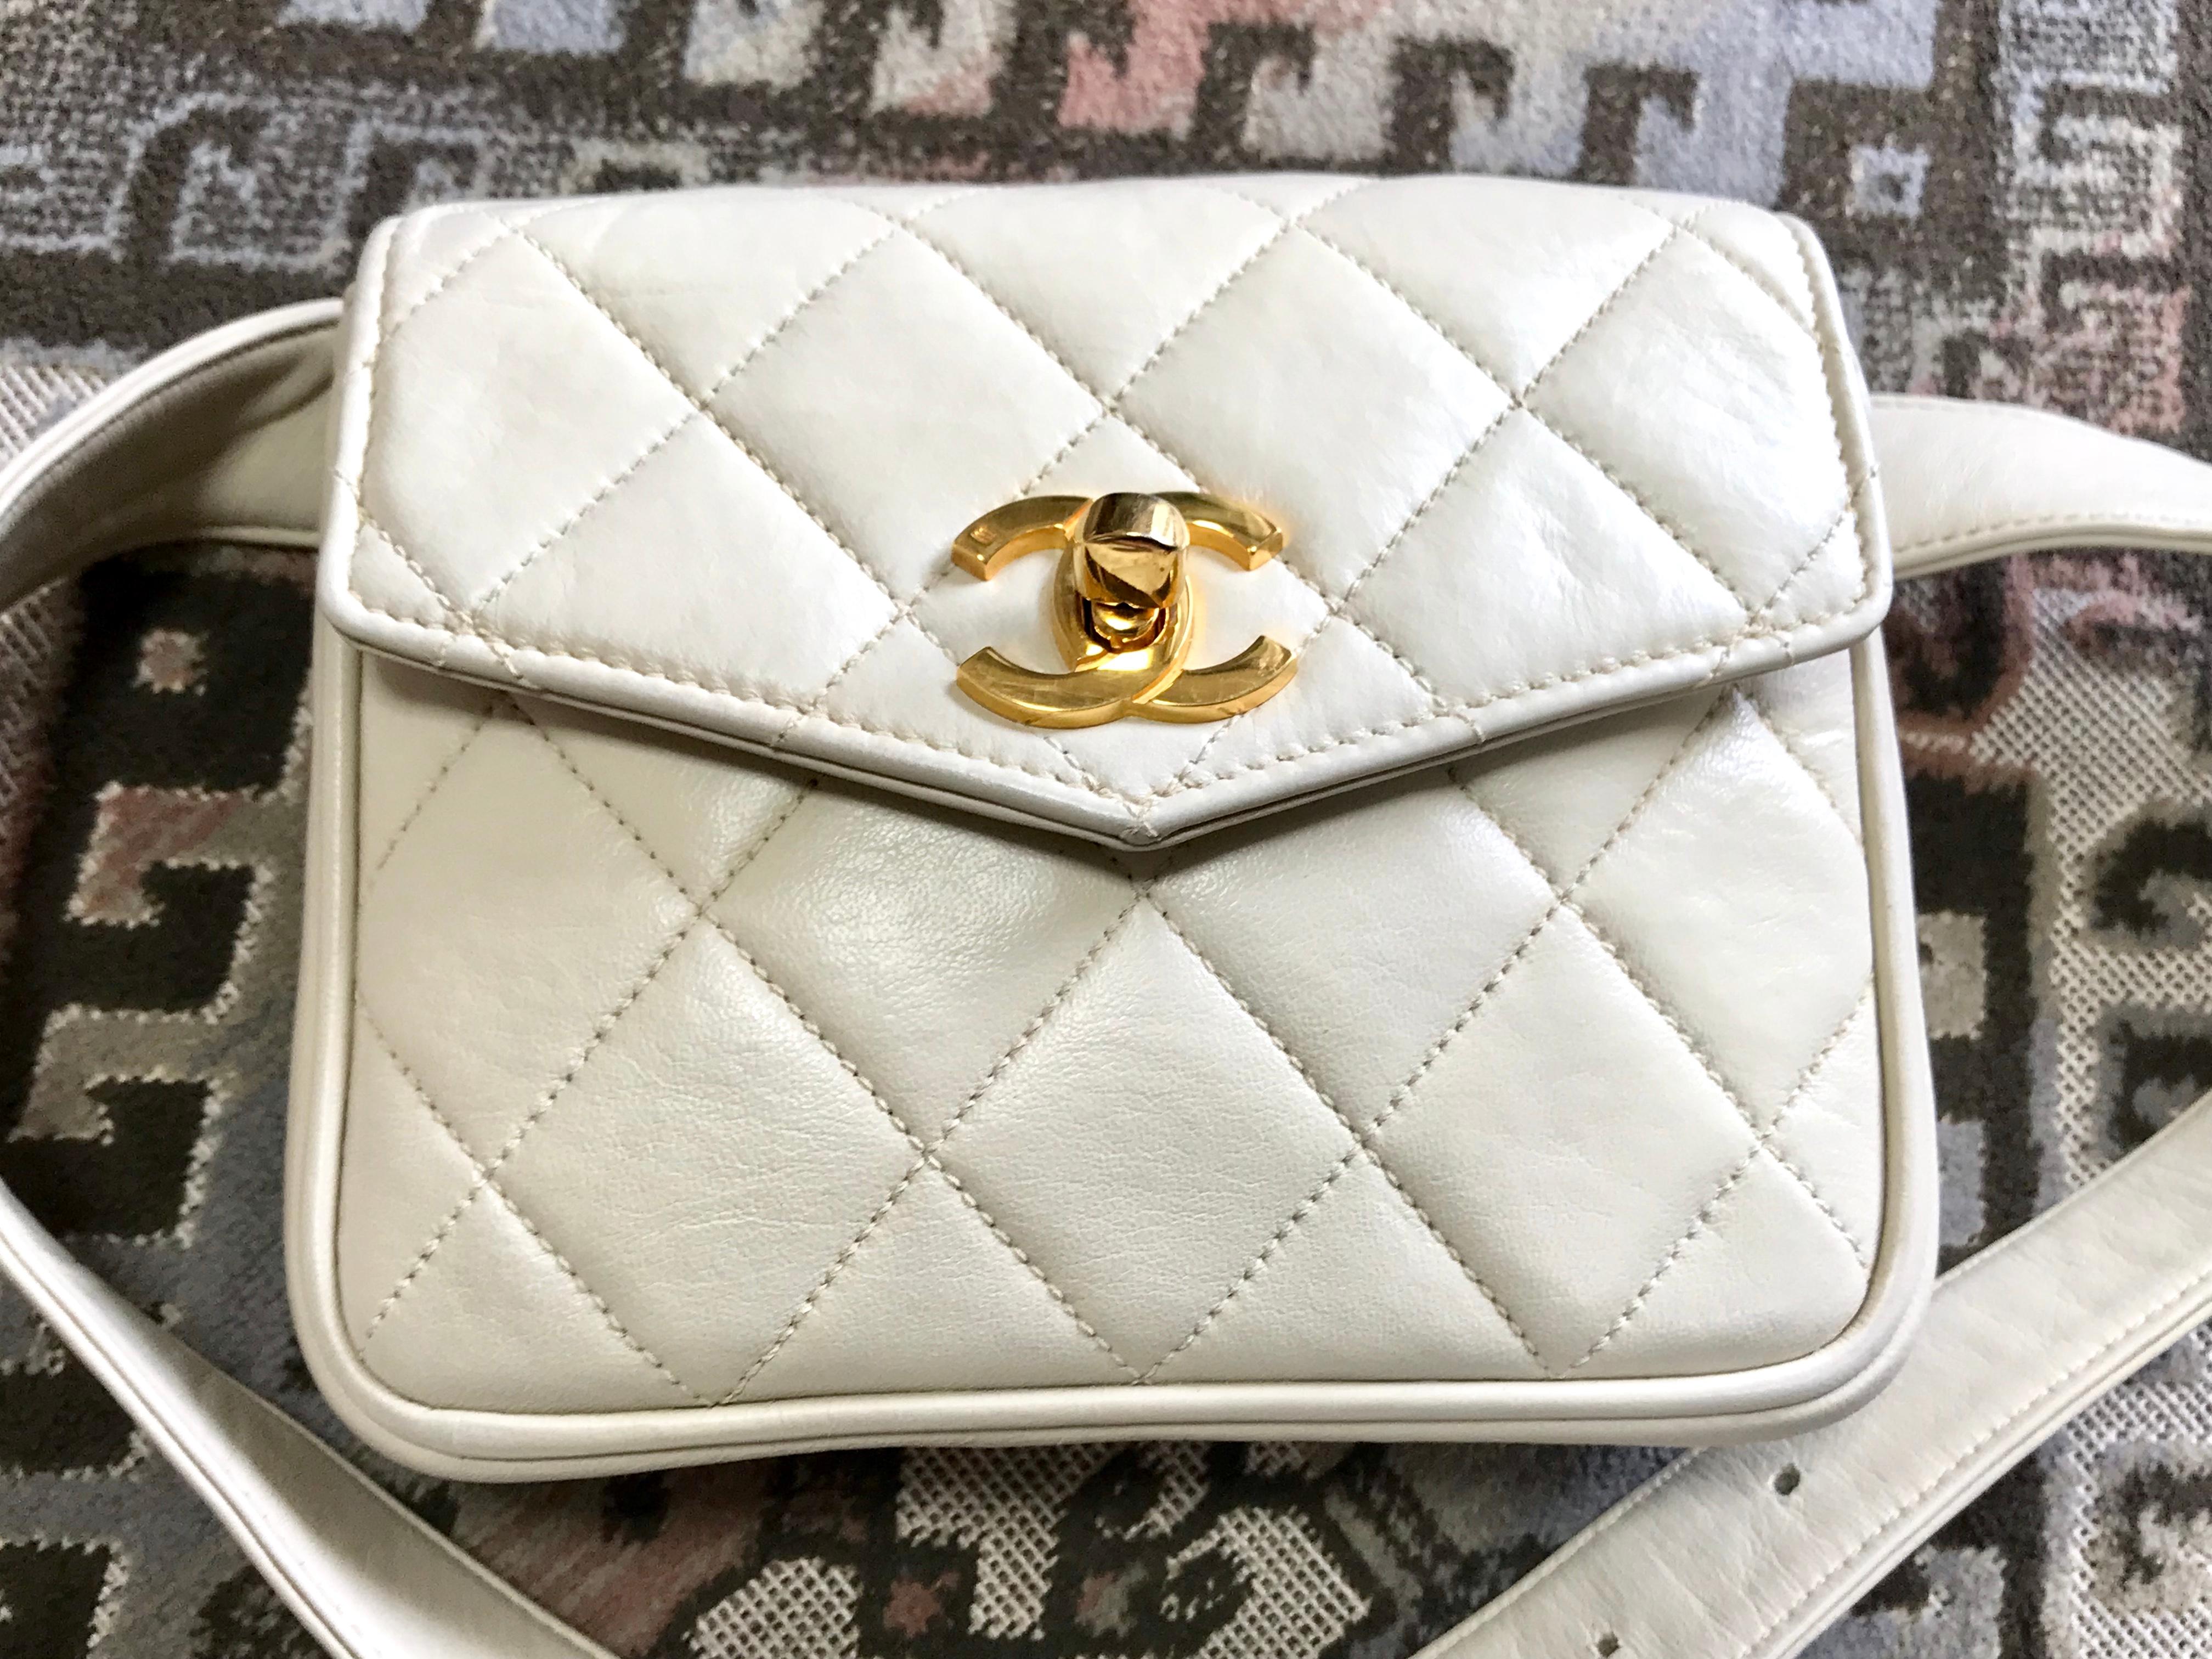 1990s. Vintage Chanel ivory/cream lamb leather fanny pack, hip bag/waist purse with golden CC and belt.
Belt would fit 26